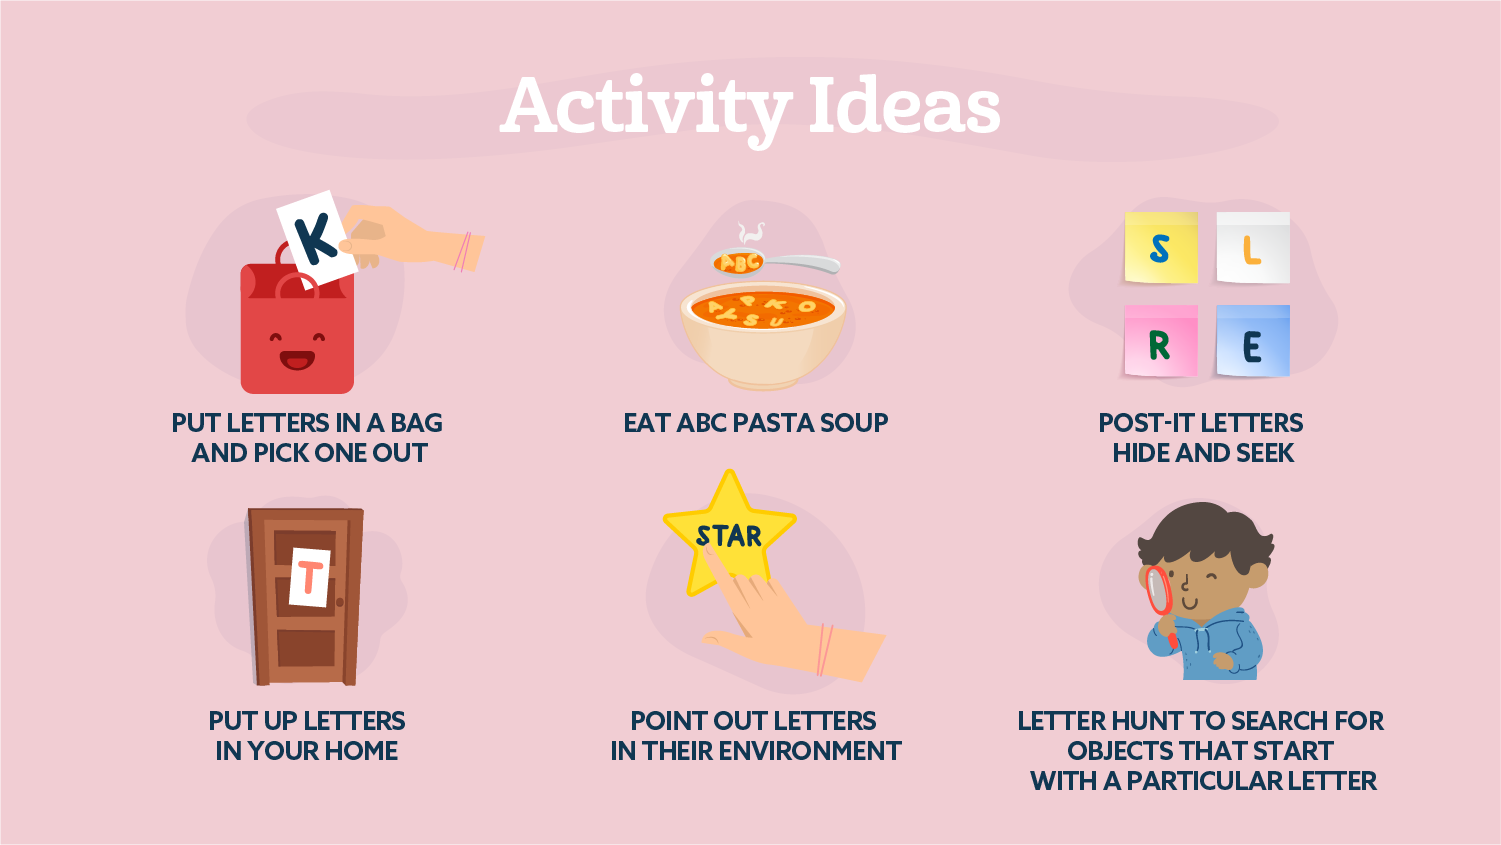 Graphic depicting 6 toddler and preschooler activity ideas including to put letters in a bag and pick one out, eat ABC pasta soup, writing letters on post-it notes, put up letters in your home, point out letters in the environment and doing a letter hunt to search for certain letters